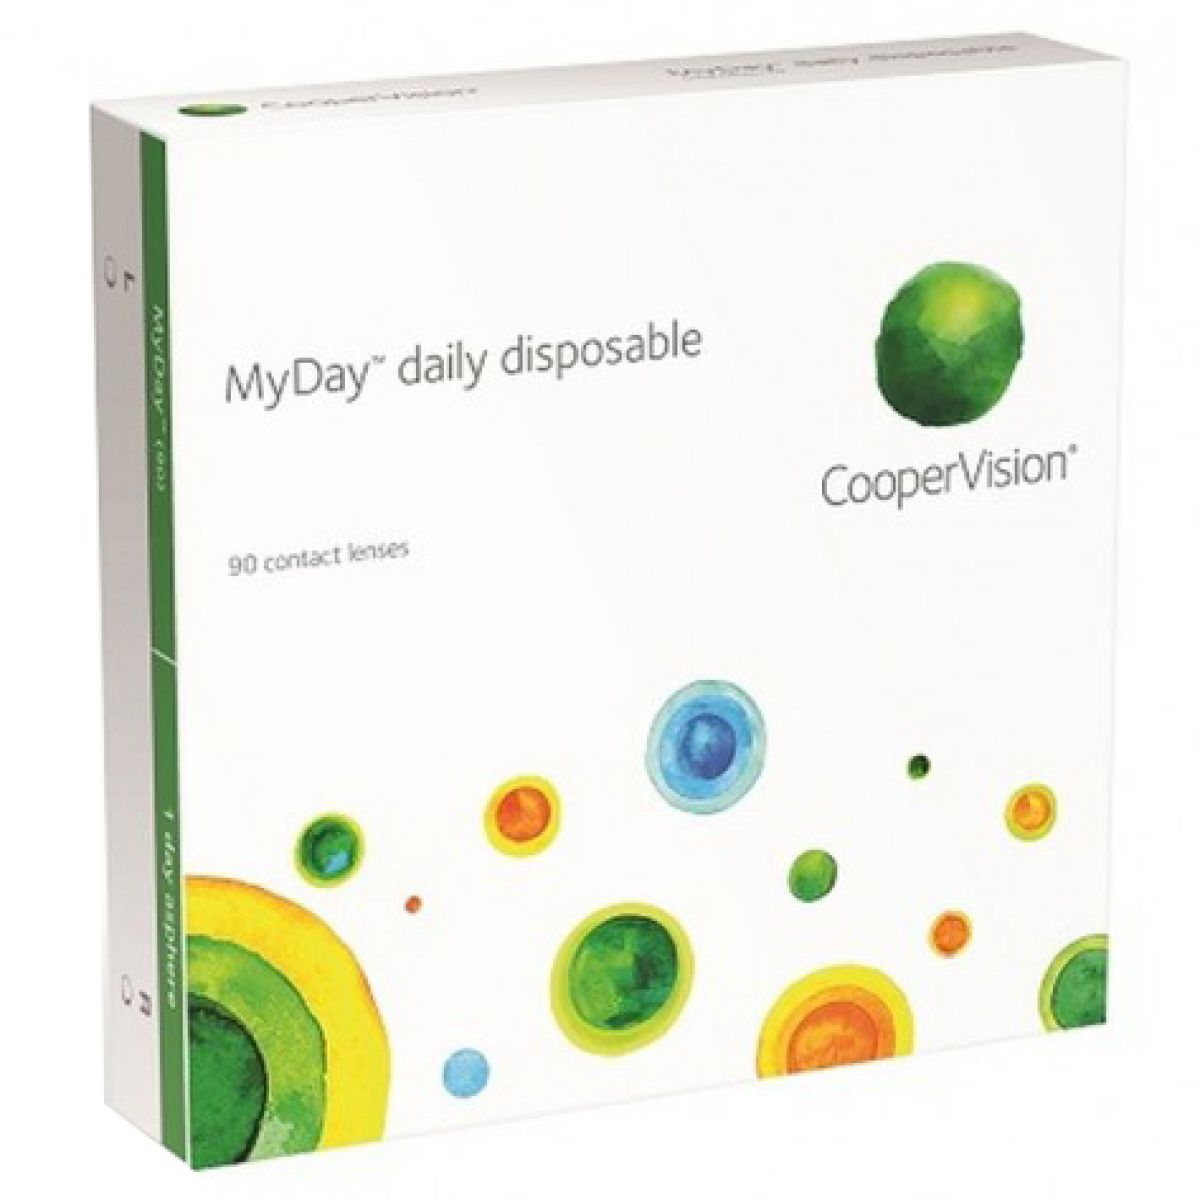 MYDAY DAILY DISPOSABLE CONTACT LENSES (90 LENSES)